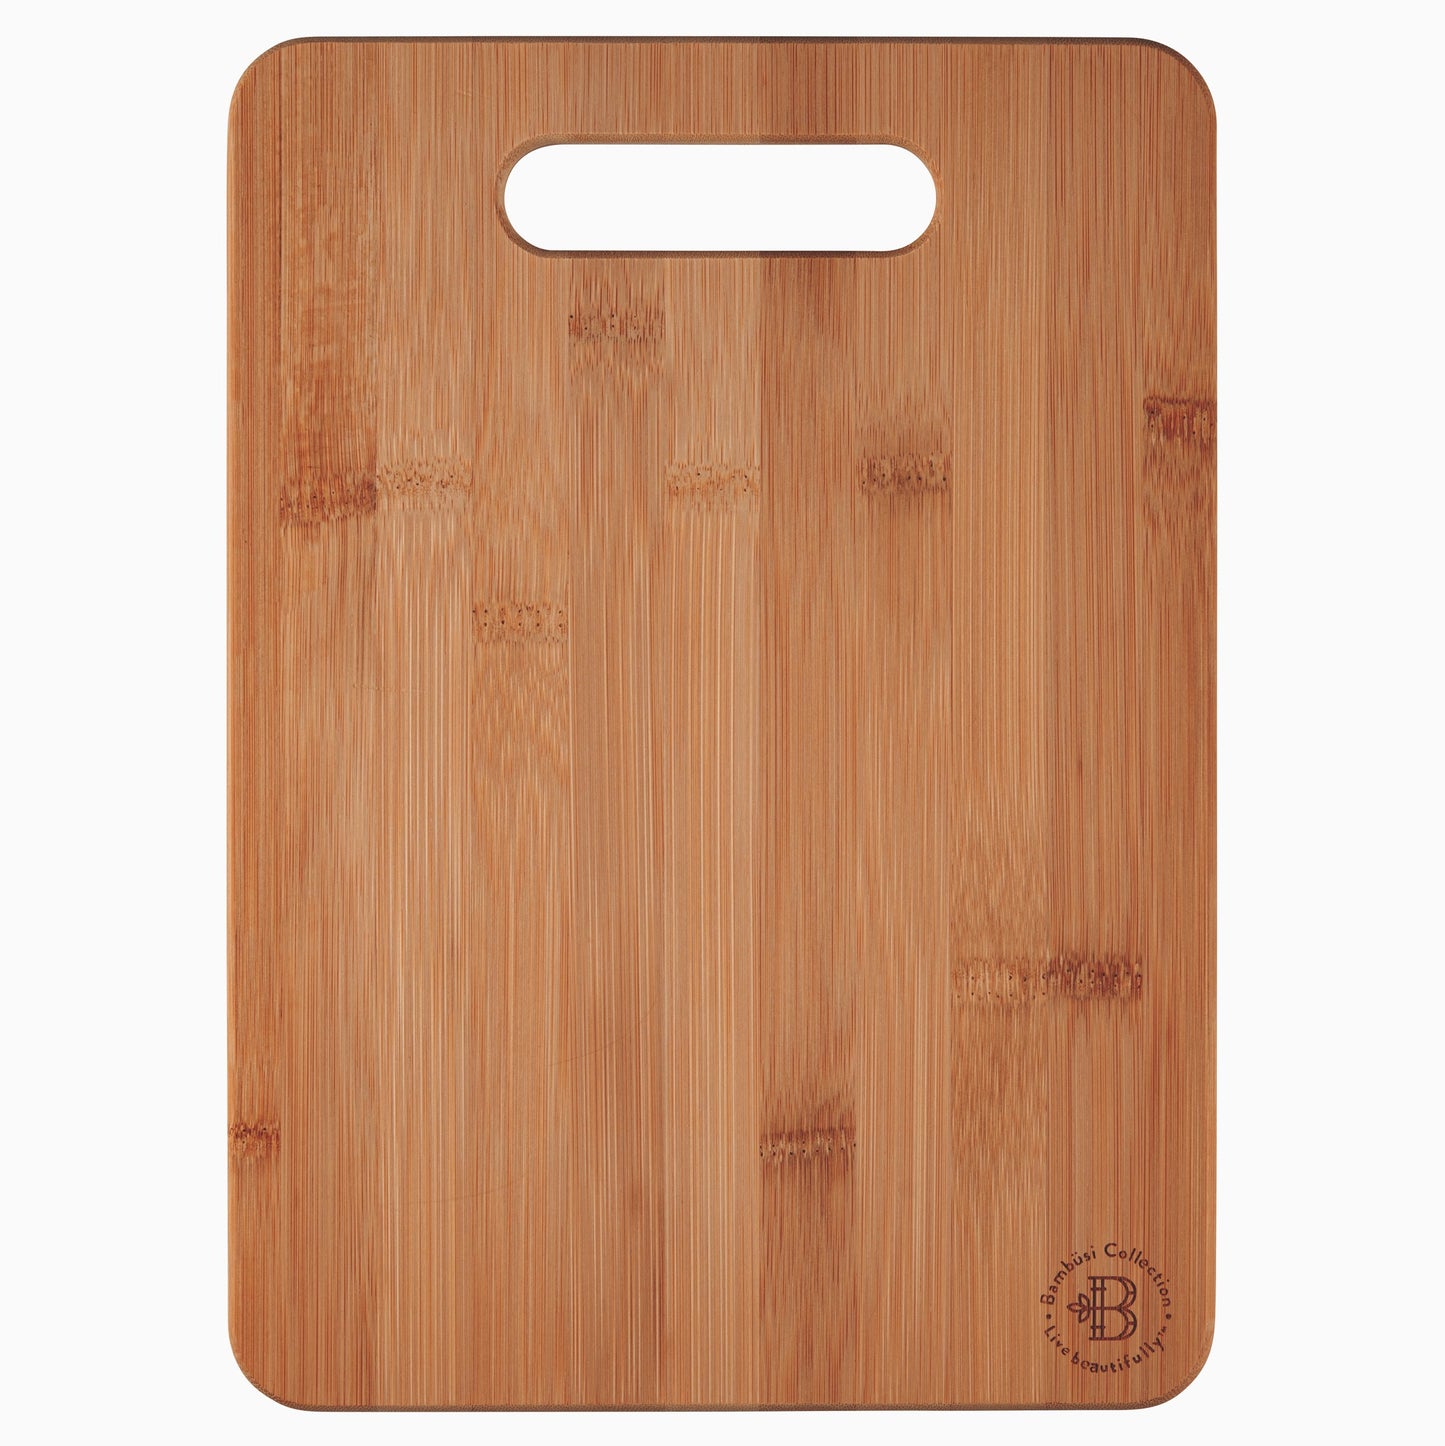 Bamboo Cutting and Chopping Board with Handle - Western Nest, LLC